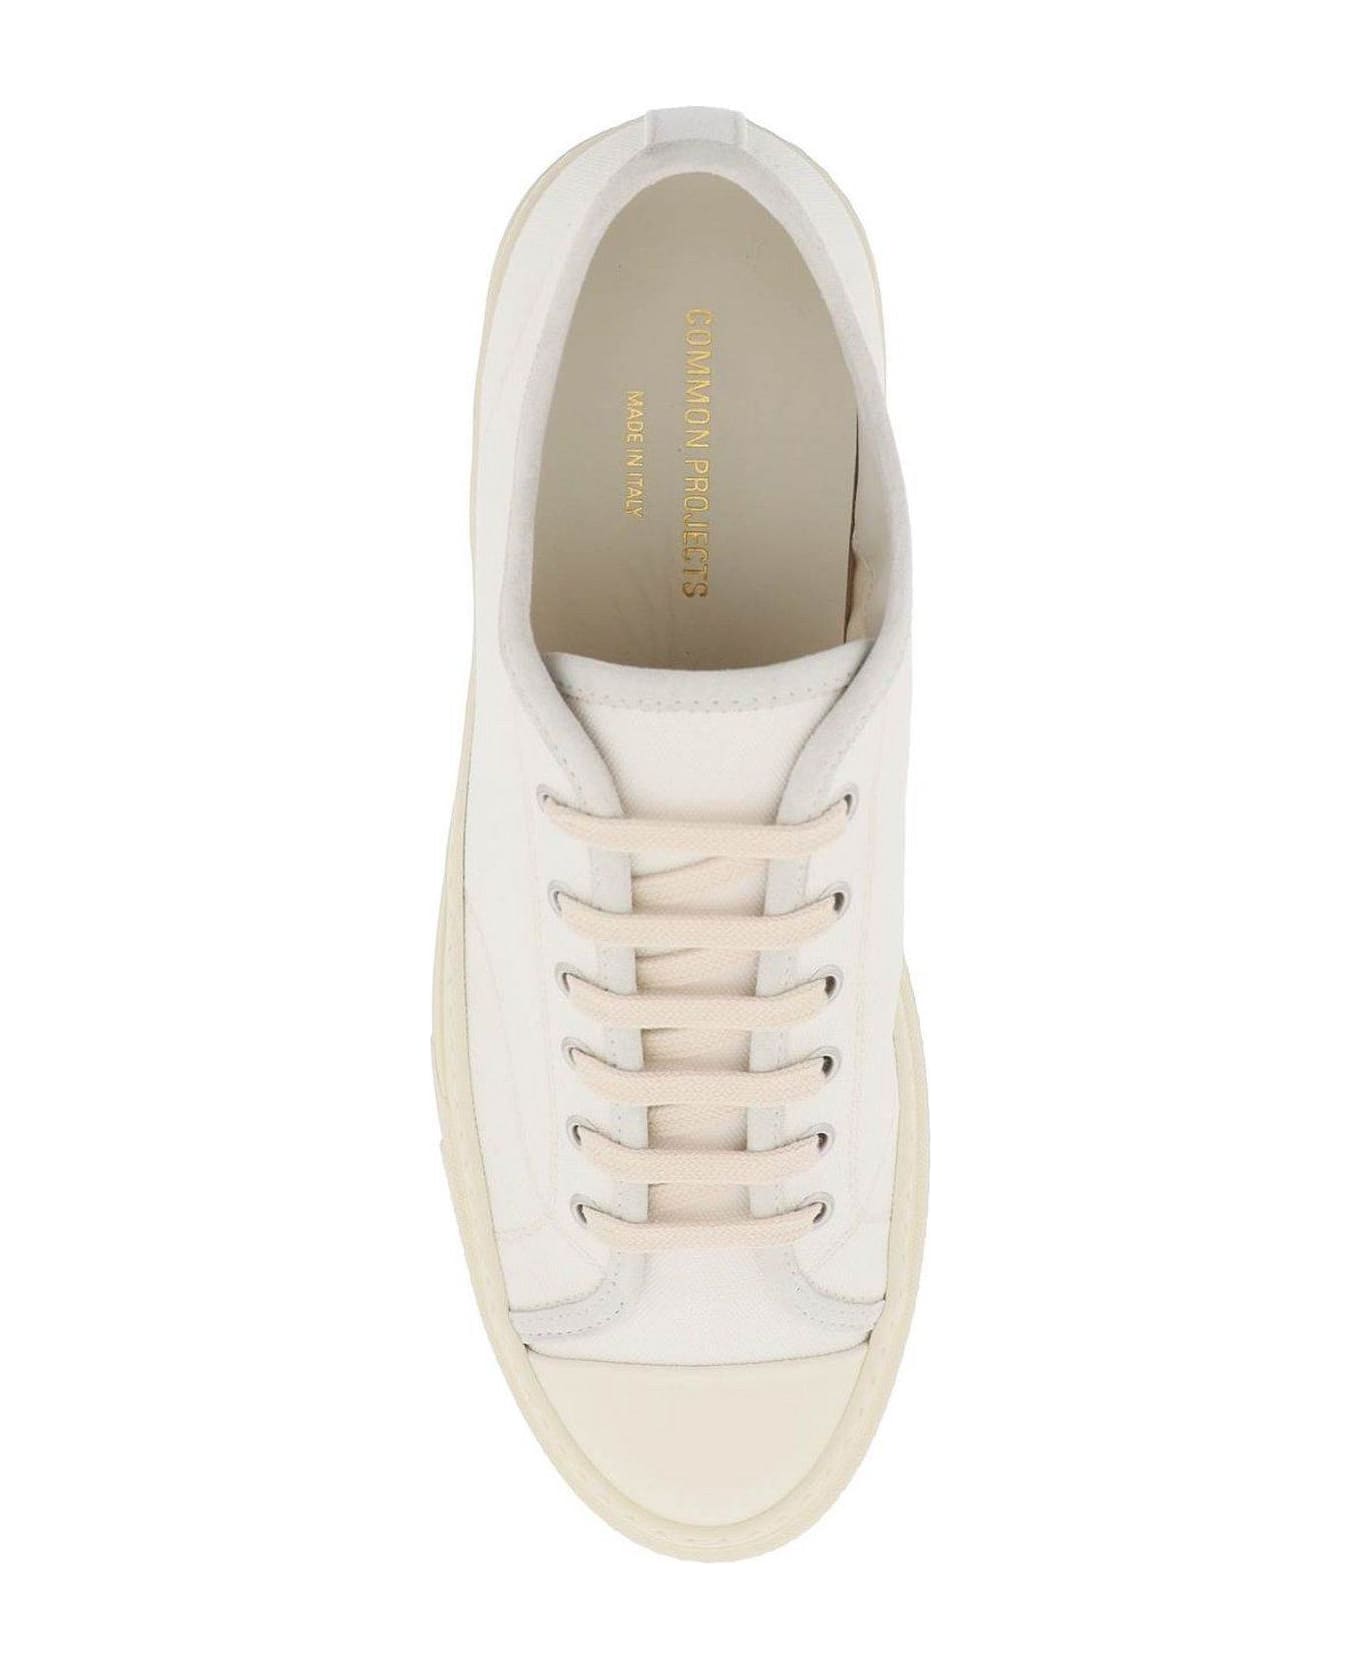 Common Projects Tournament Round Toe Sneakers - White